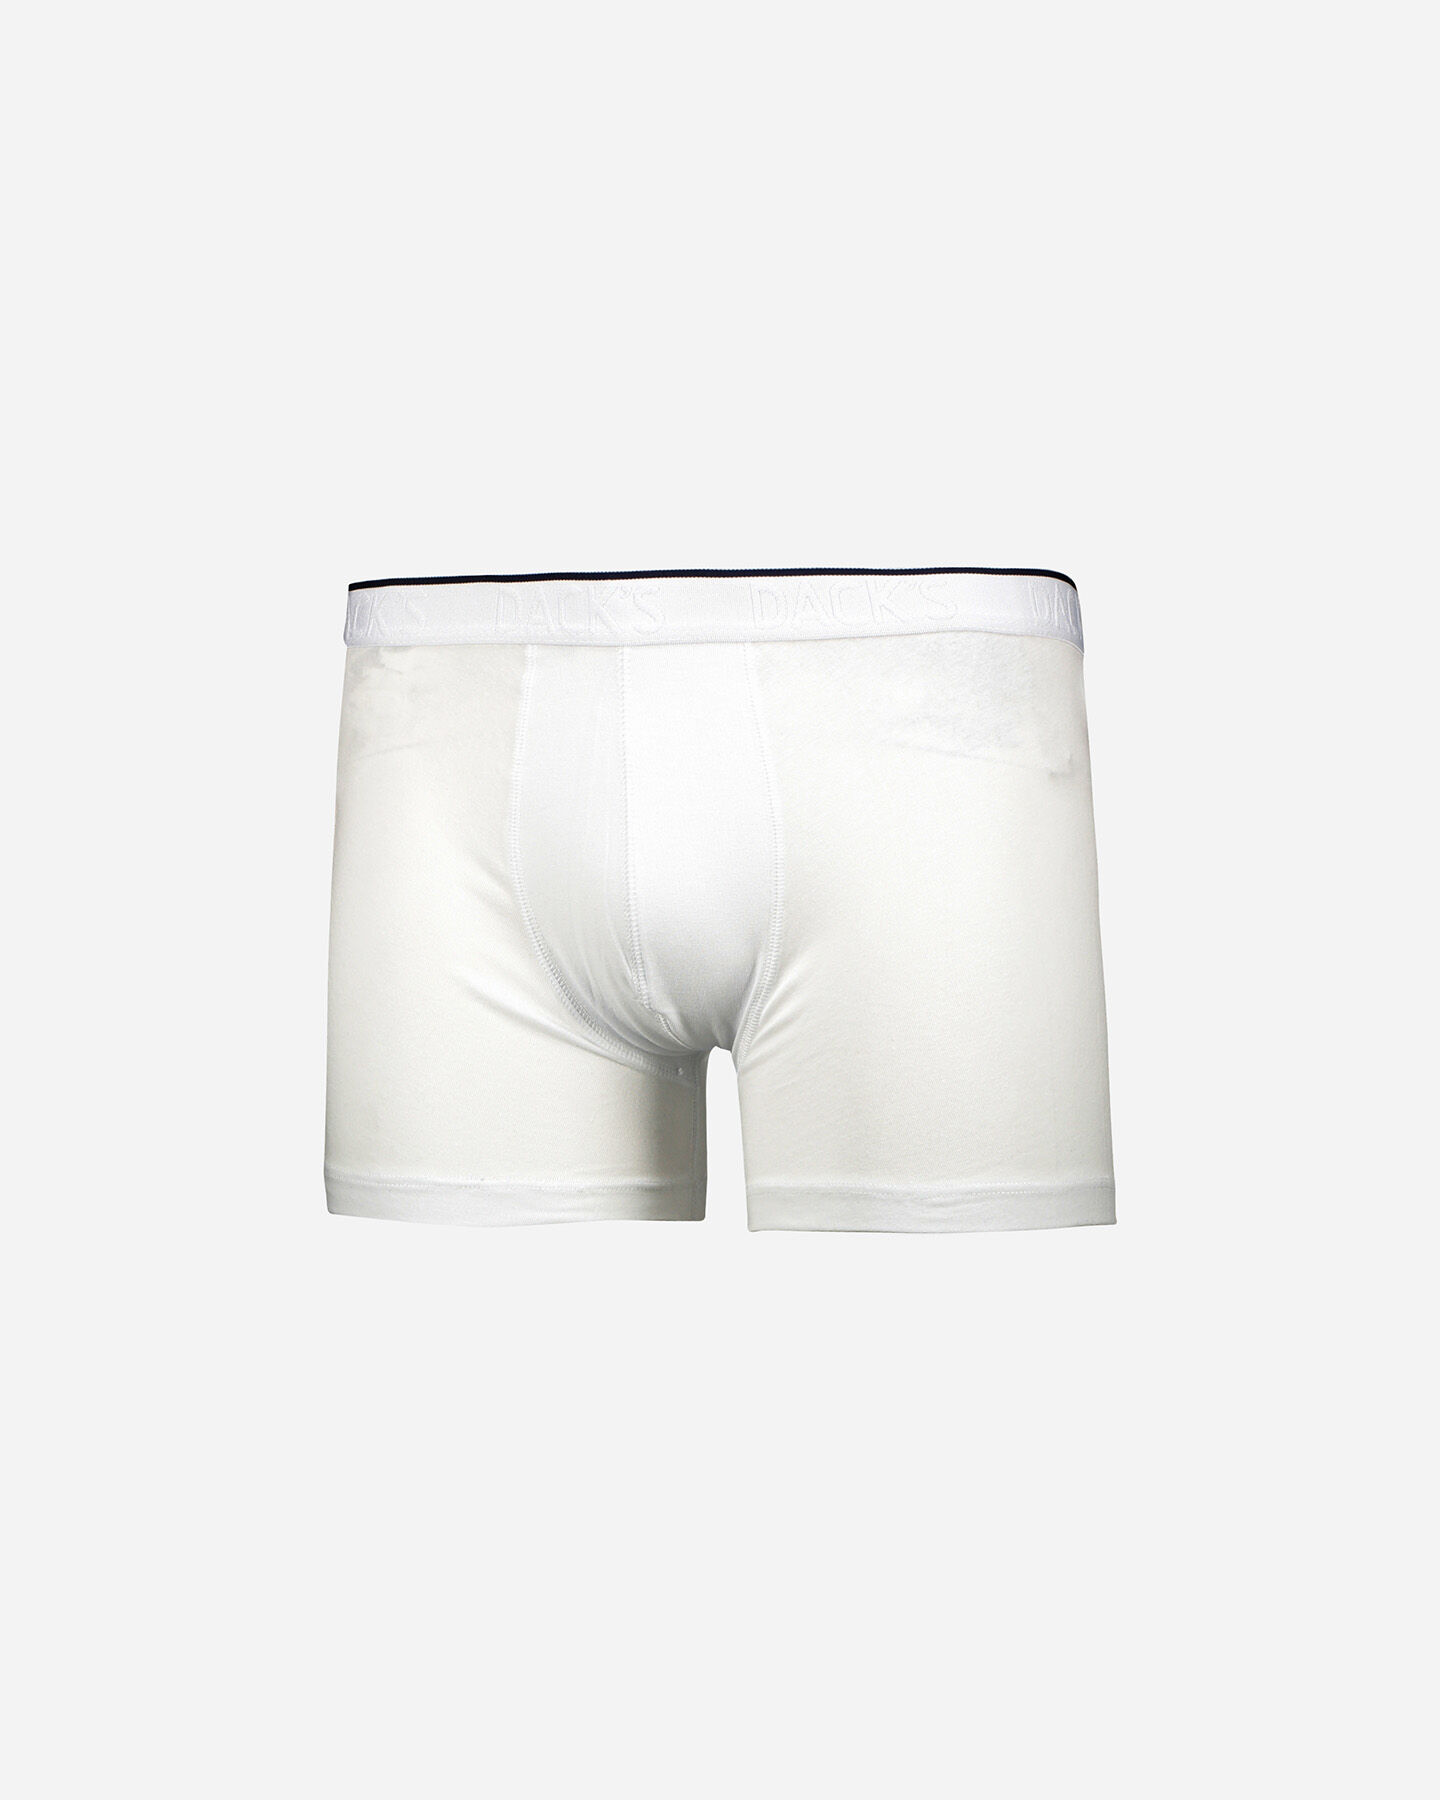  Intimo DACK'S BIPACK BASIC BOXER M S4061962|050/001|L scatto 1